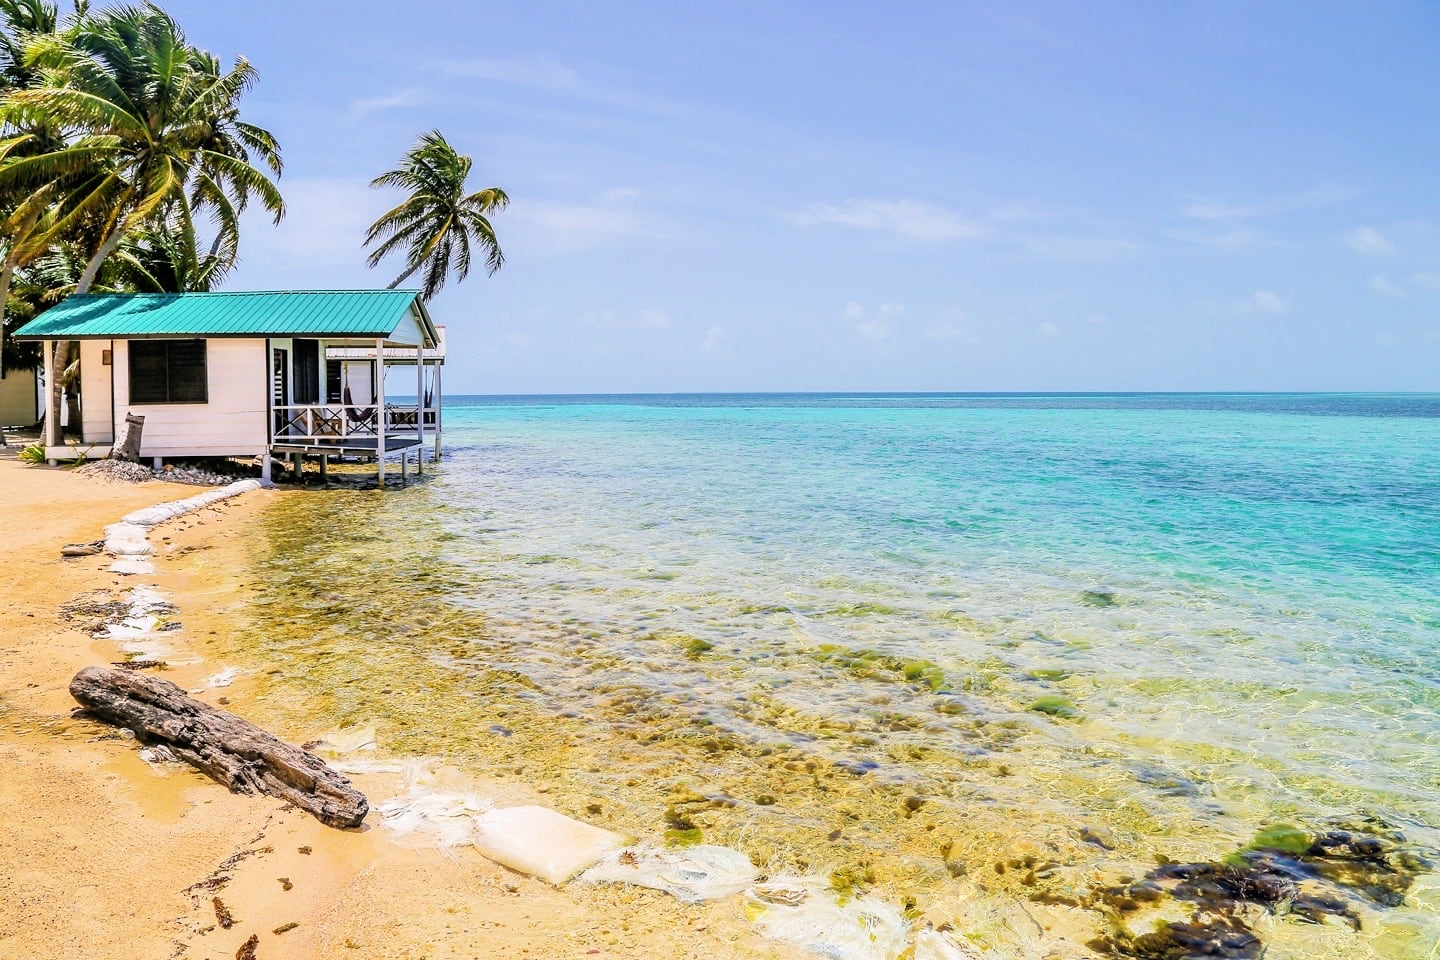 Caribbean overwater bungalow in Belize on Tobacco Caye